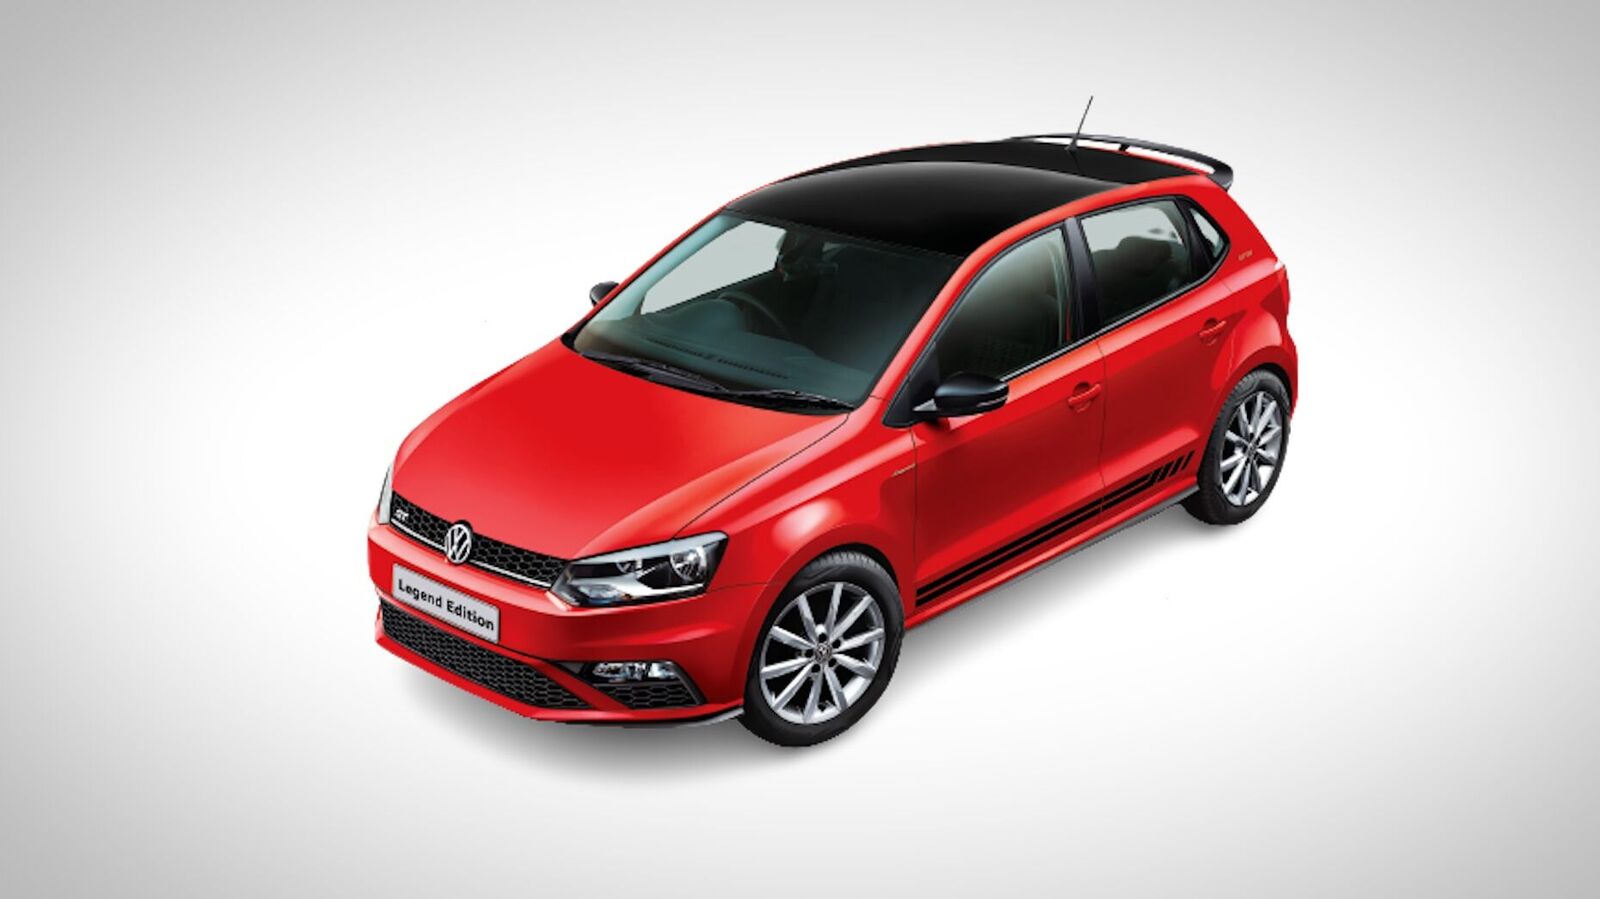 Polo to off soon as Volkswagen announce end production in India HT Auto